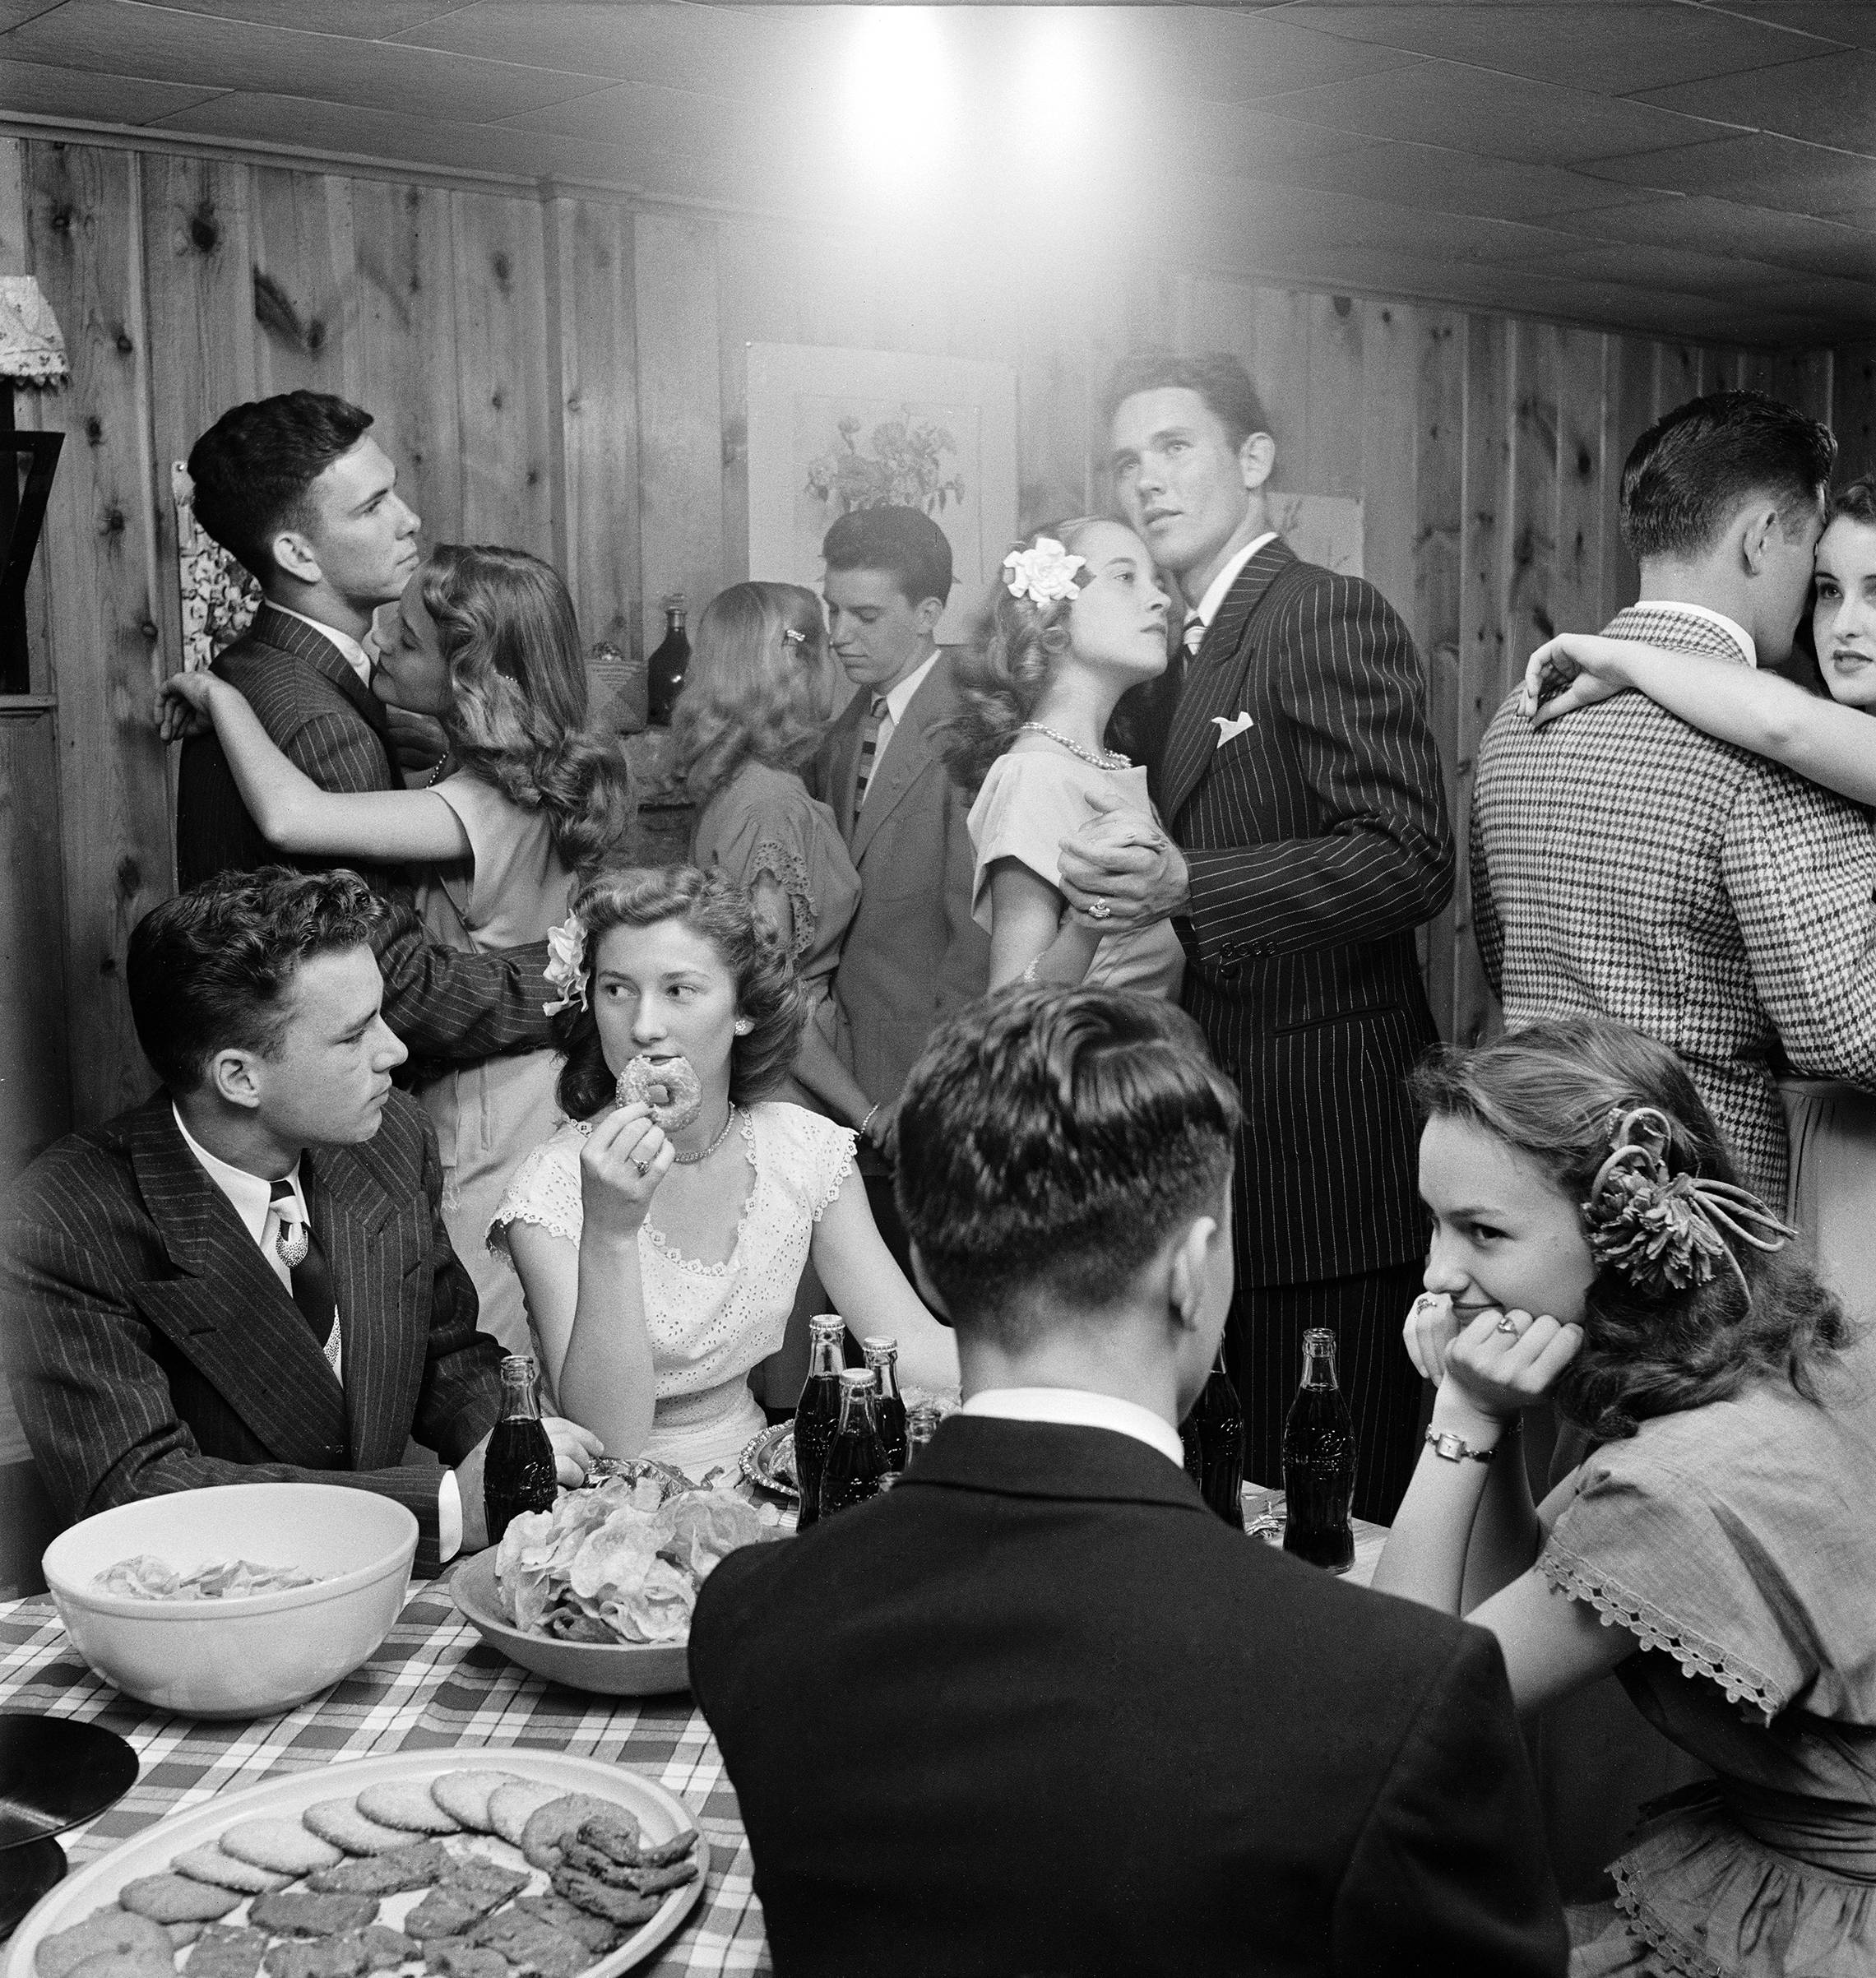 Teenagers dancing and socializing at a party, 1947.jpg